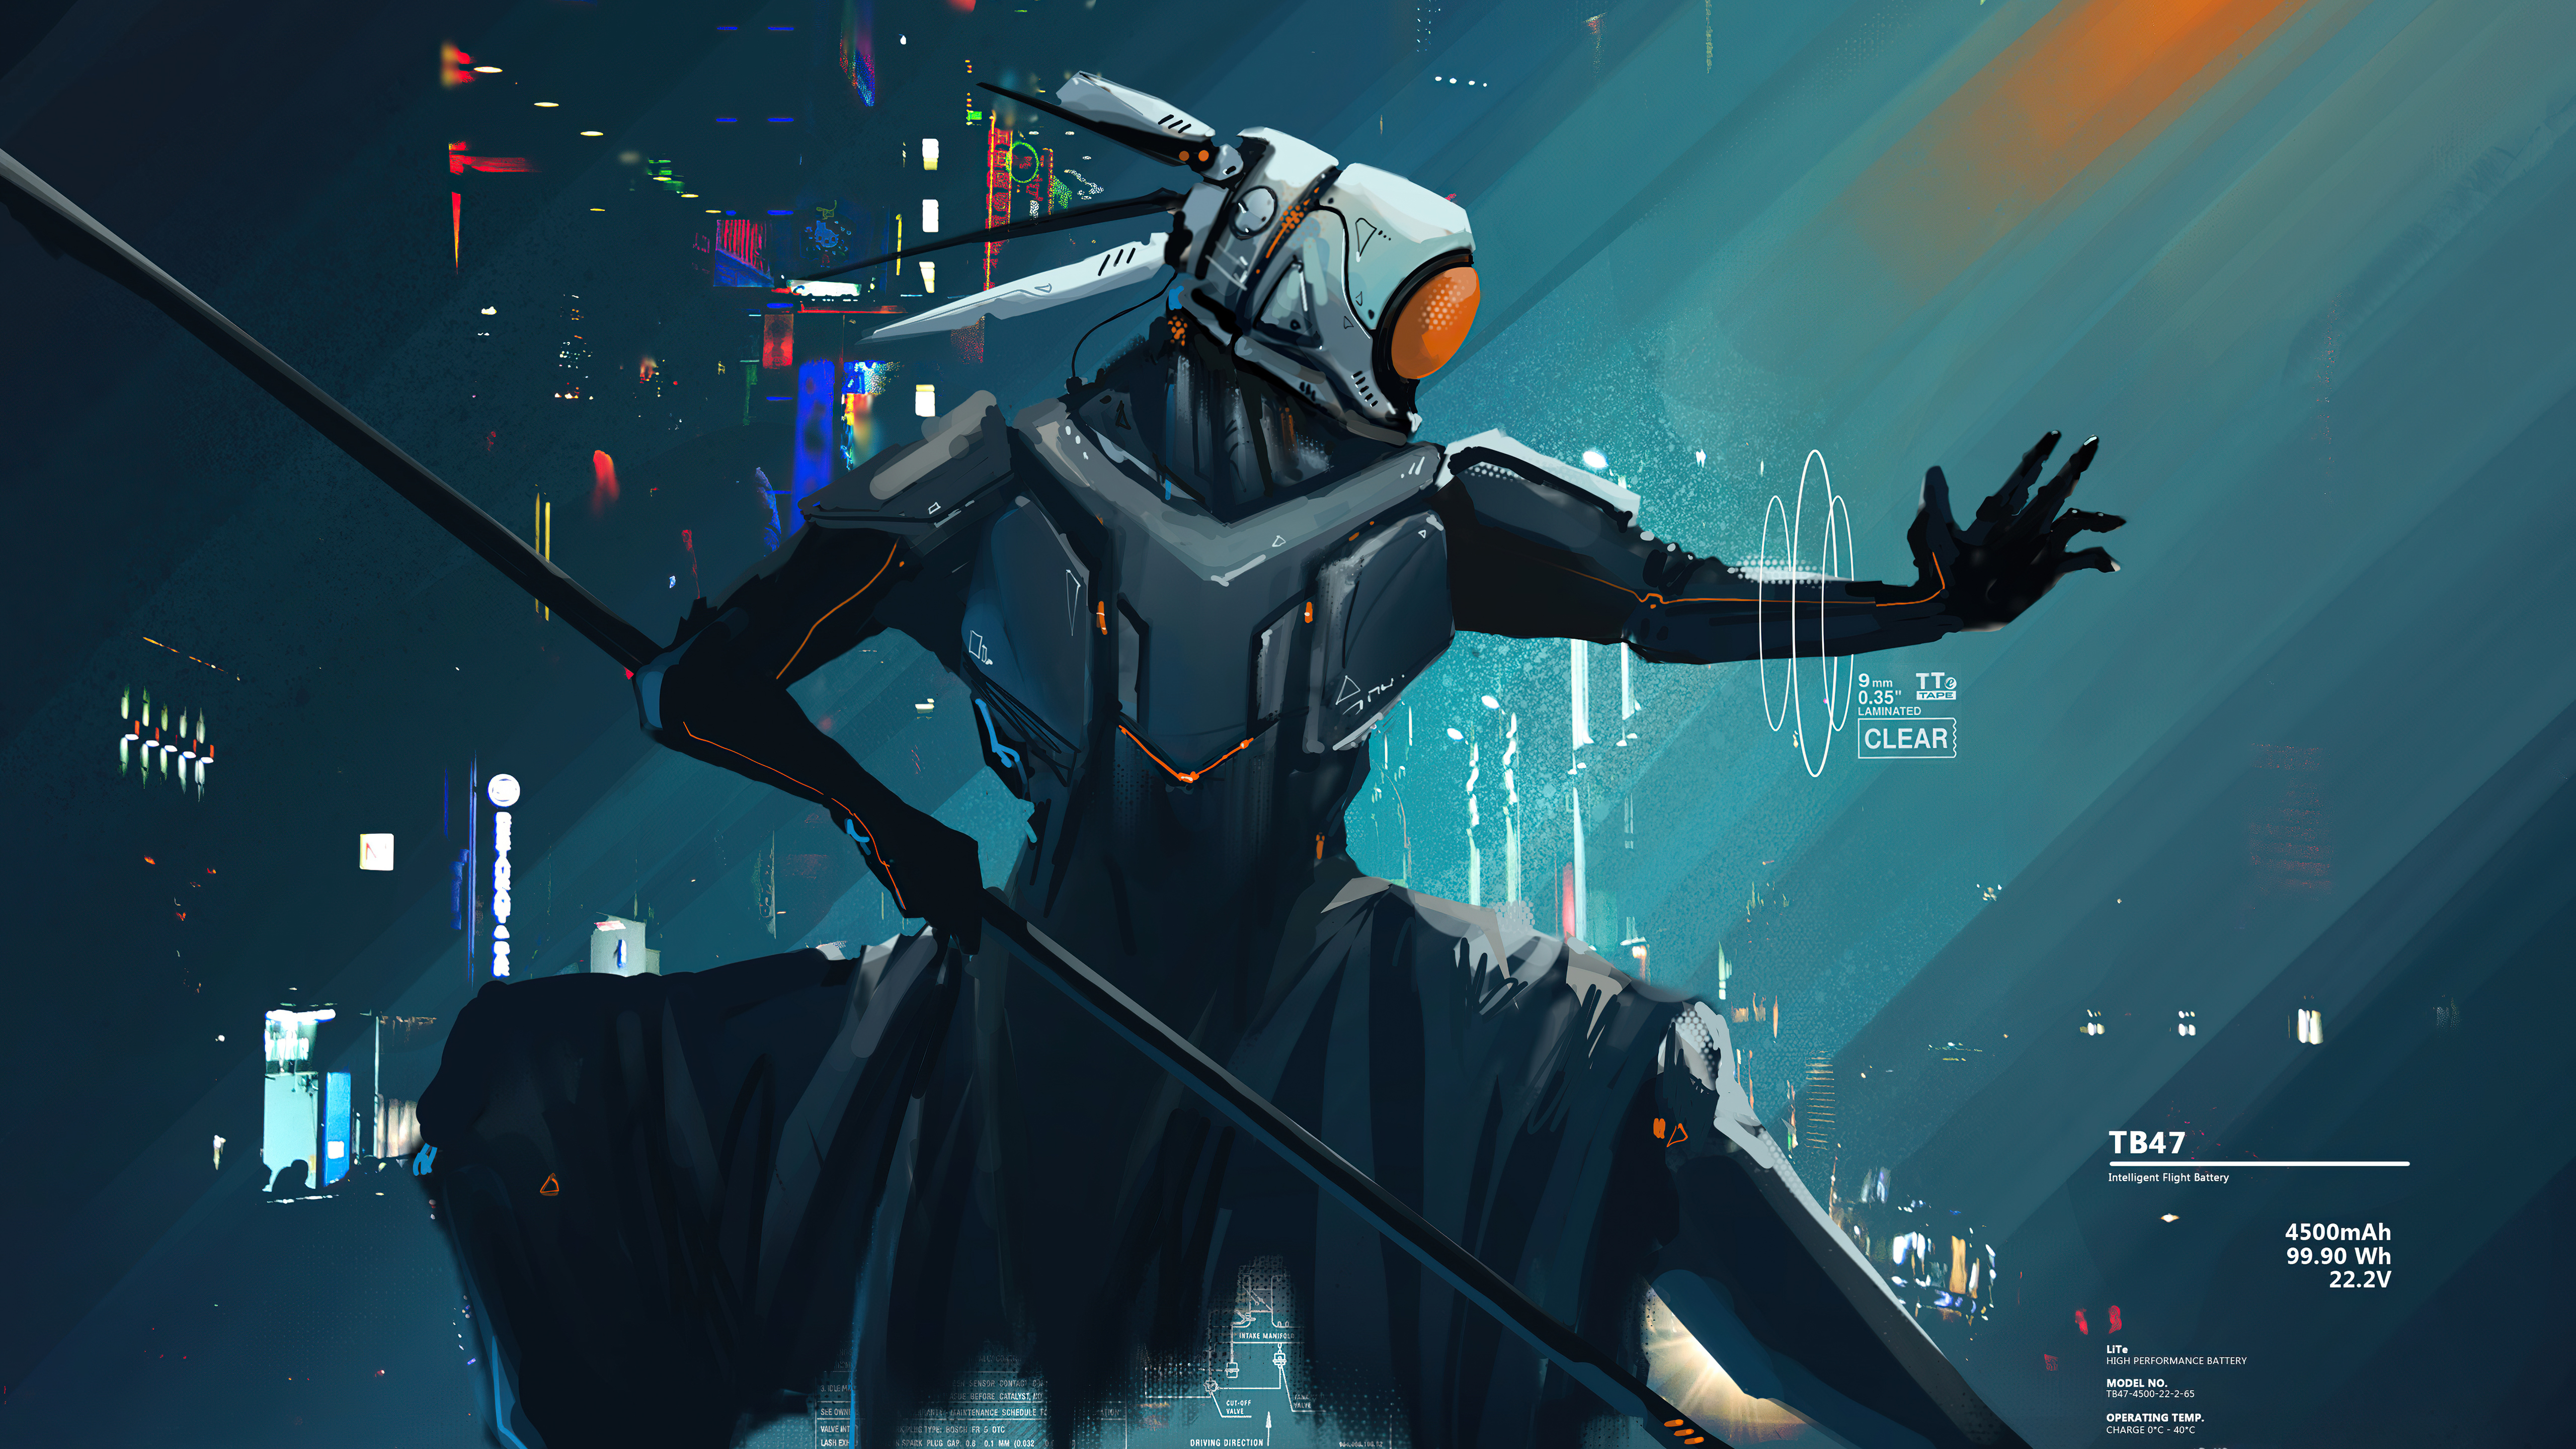 Ninja Cyber Punk 5k, HD Artist, 4k Wallpaper, Image, Background, Photo and Picture